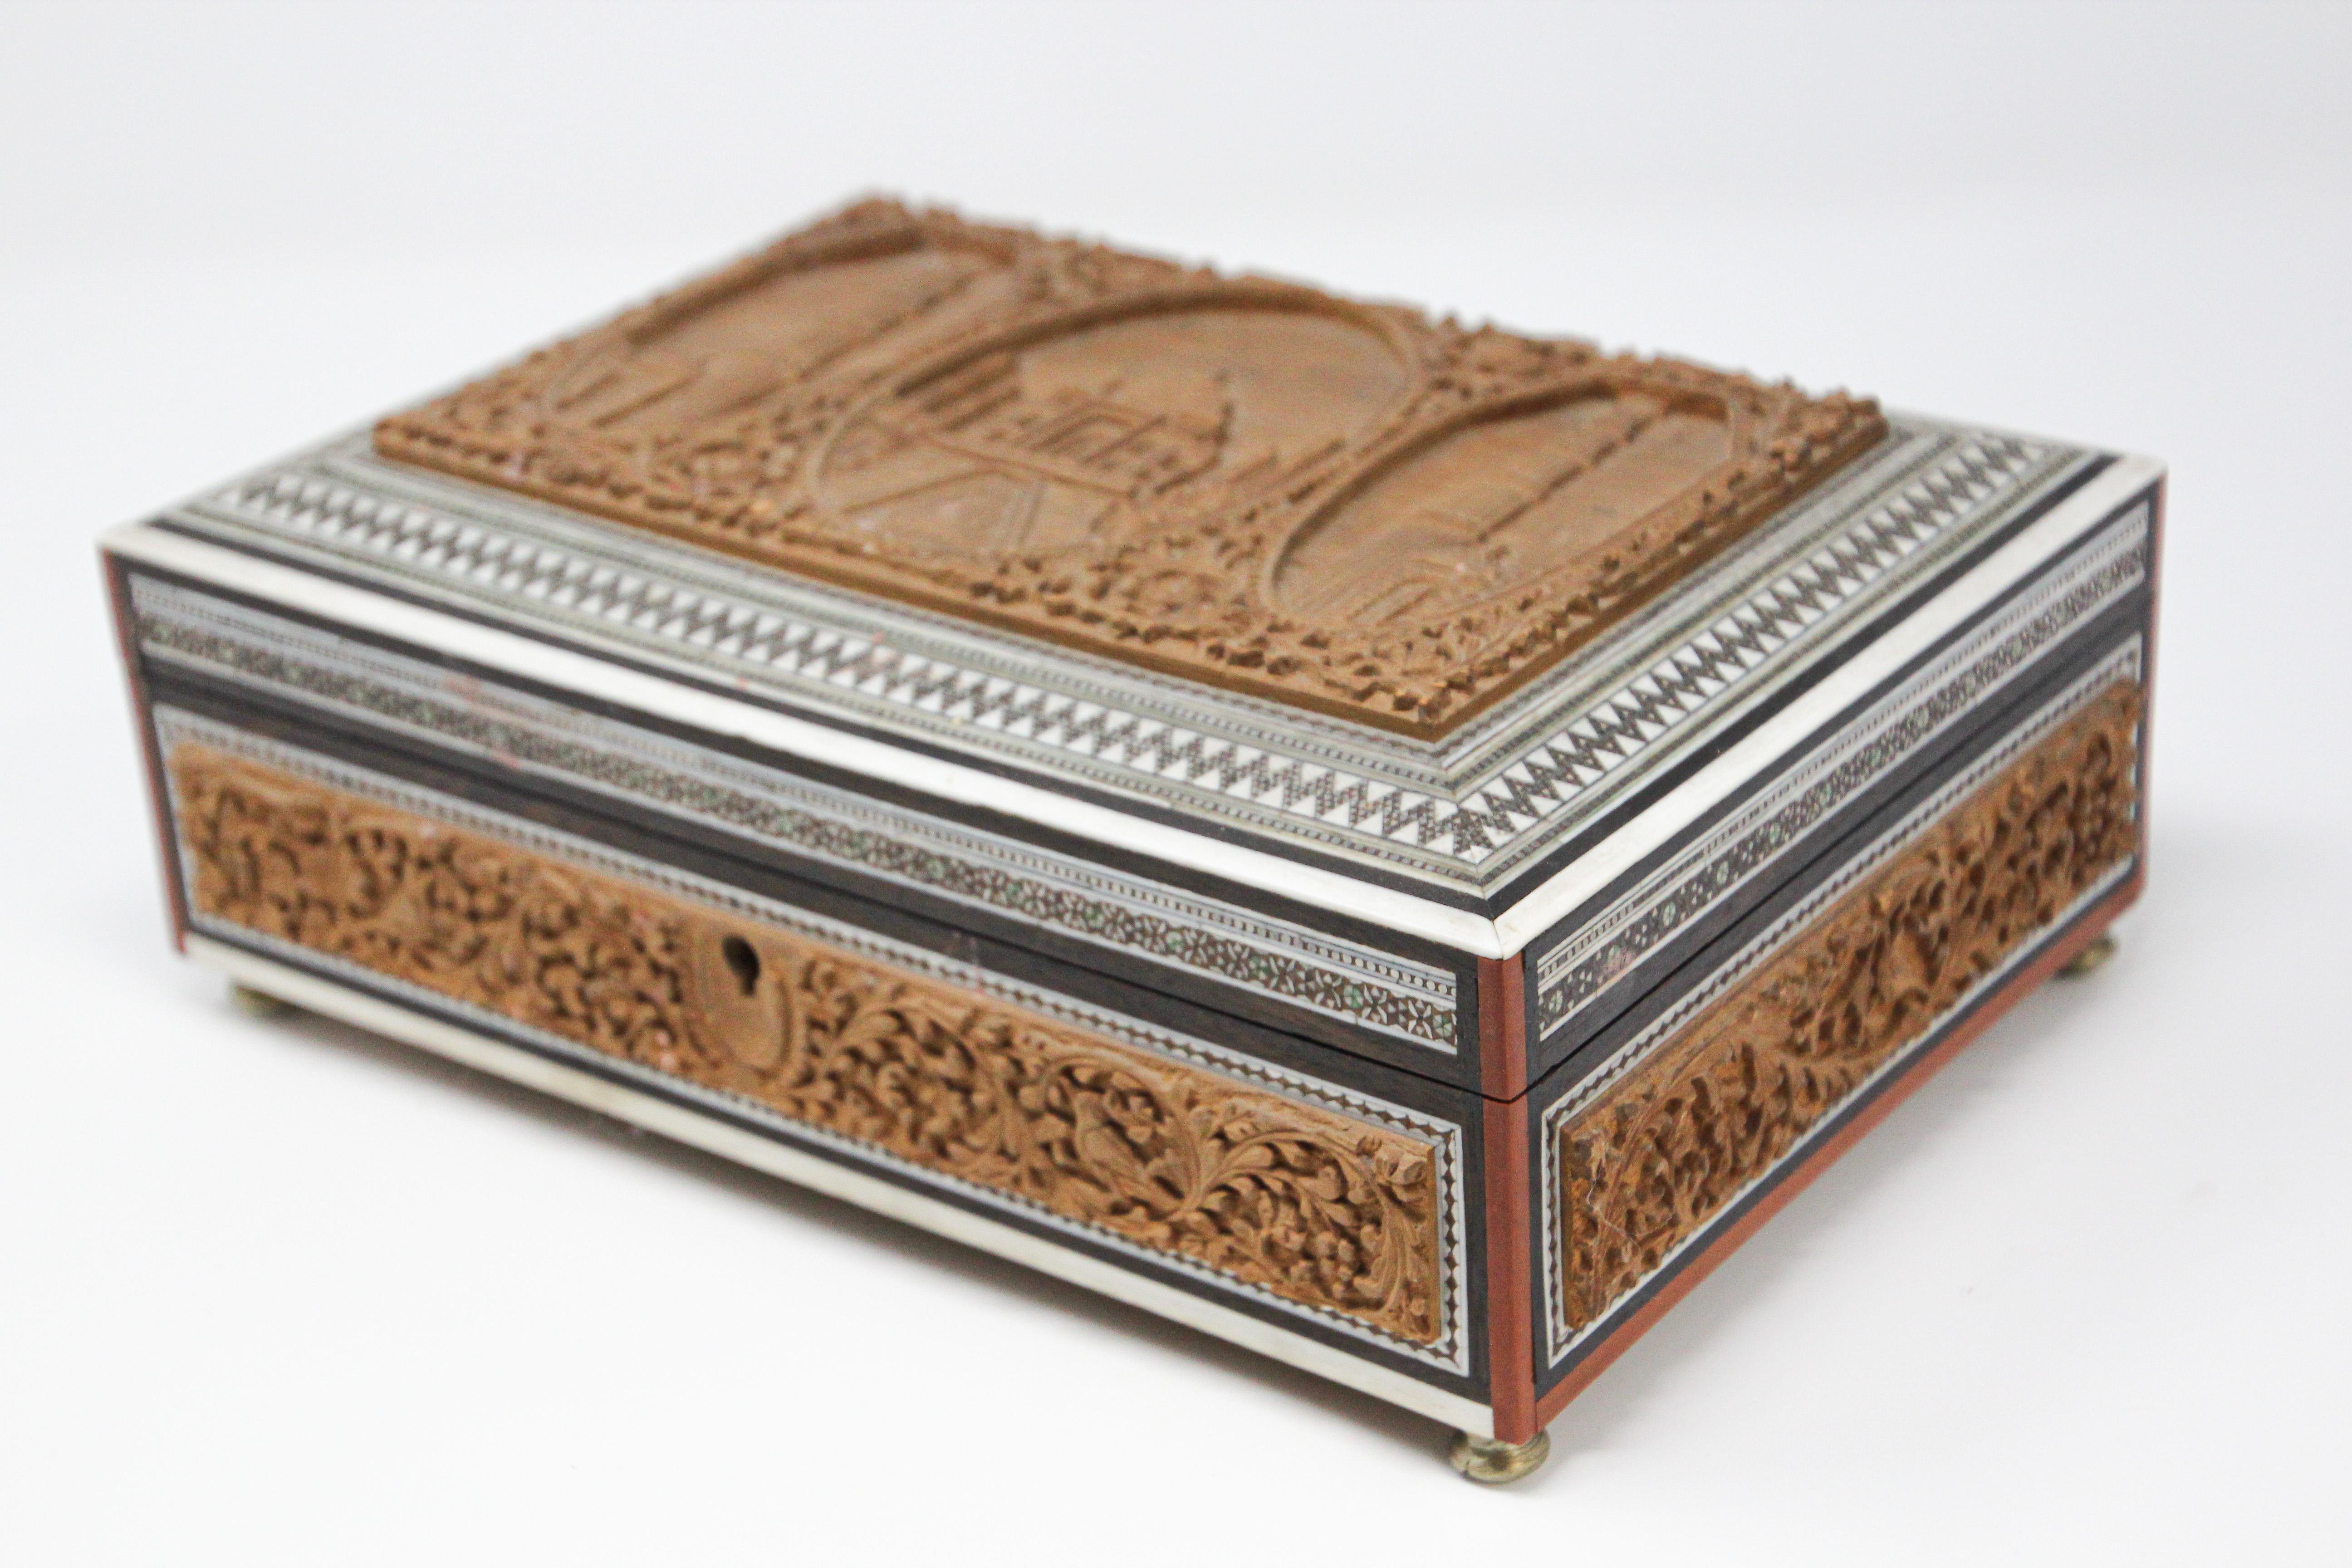 19th century Anglo-Indian wooden box fitted with various compartments finely hand carved.
The top is finely hand carved with the Taj Mahal.
The interior with removable hand carved nine-lidded compartments, the front cover has a mirror, the whole